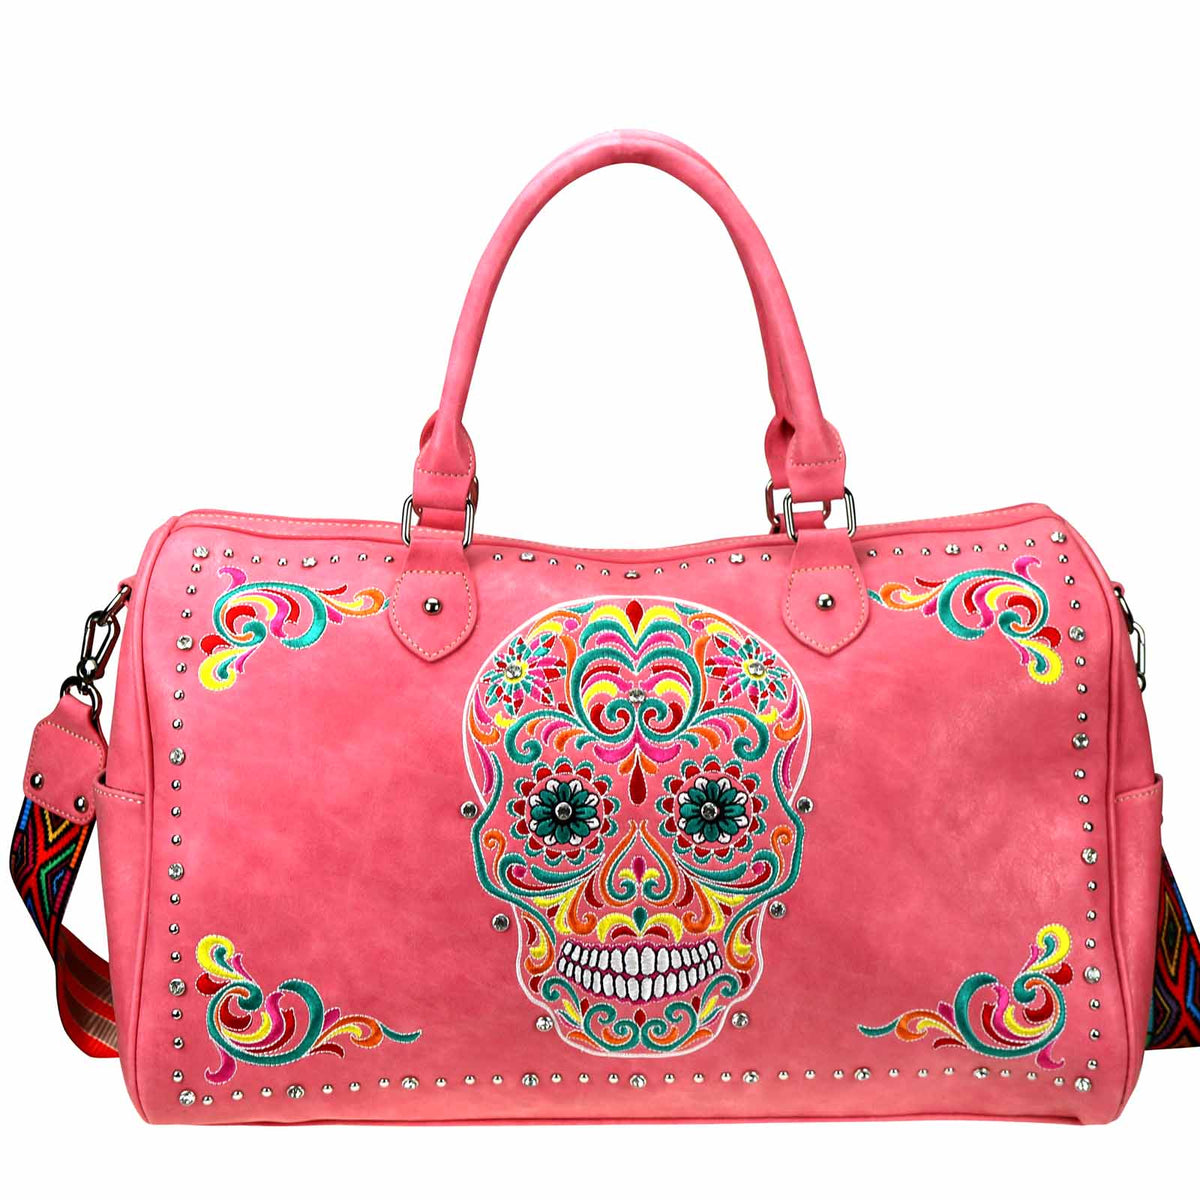 Embroidered Sugar Skull Duffle Bag:  Vibrant embroidered Sugar Skull   Accented with silver and crystal studs Top zippered closure An open pocket on each side with button closure Interior includes a zippered pocket and 2 open pockets  Metal feet on the bottom for protection and stability Detachable/adjustable shoulder strap Double handle 20" x 8" x 12.5" Double Handle Drop 6" Adjustable Strap Drop 18"